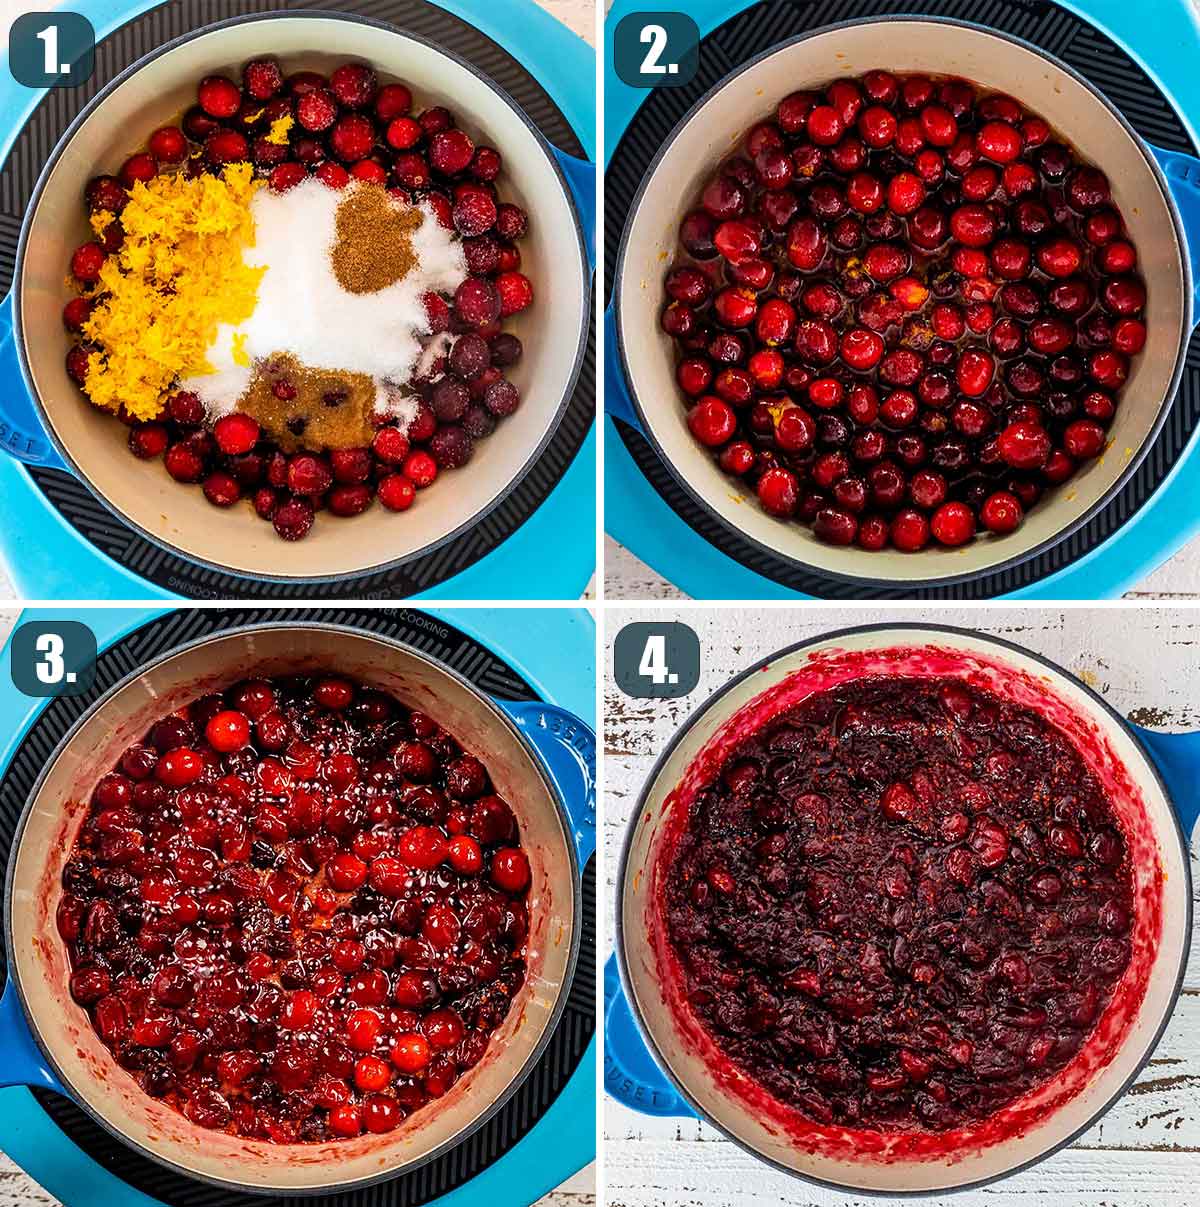 detailed process shots showing how to make cranberry sauce.